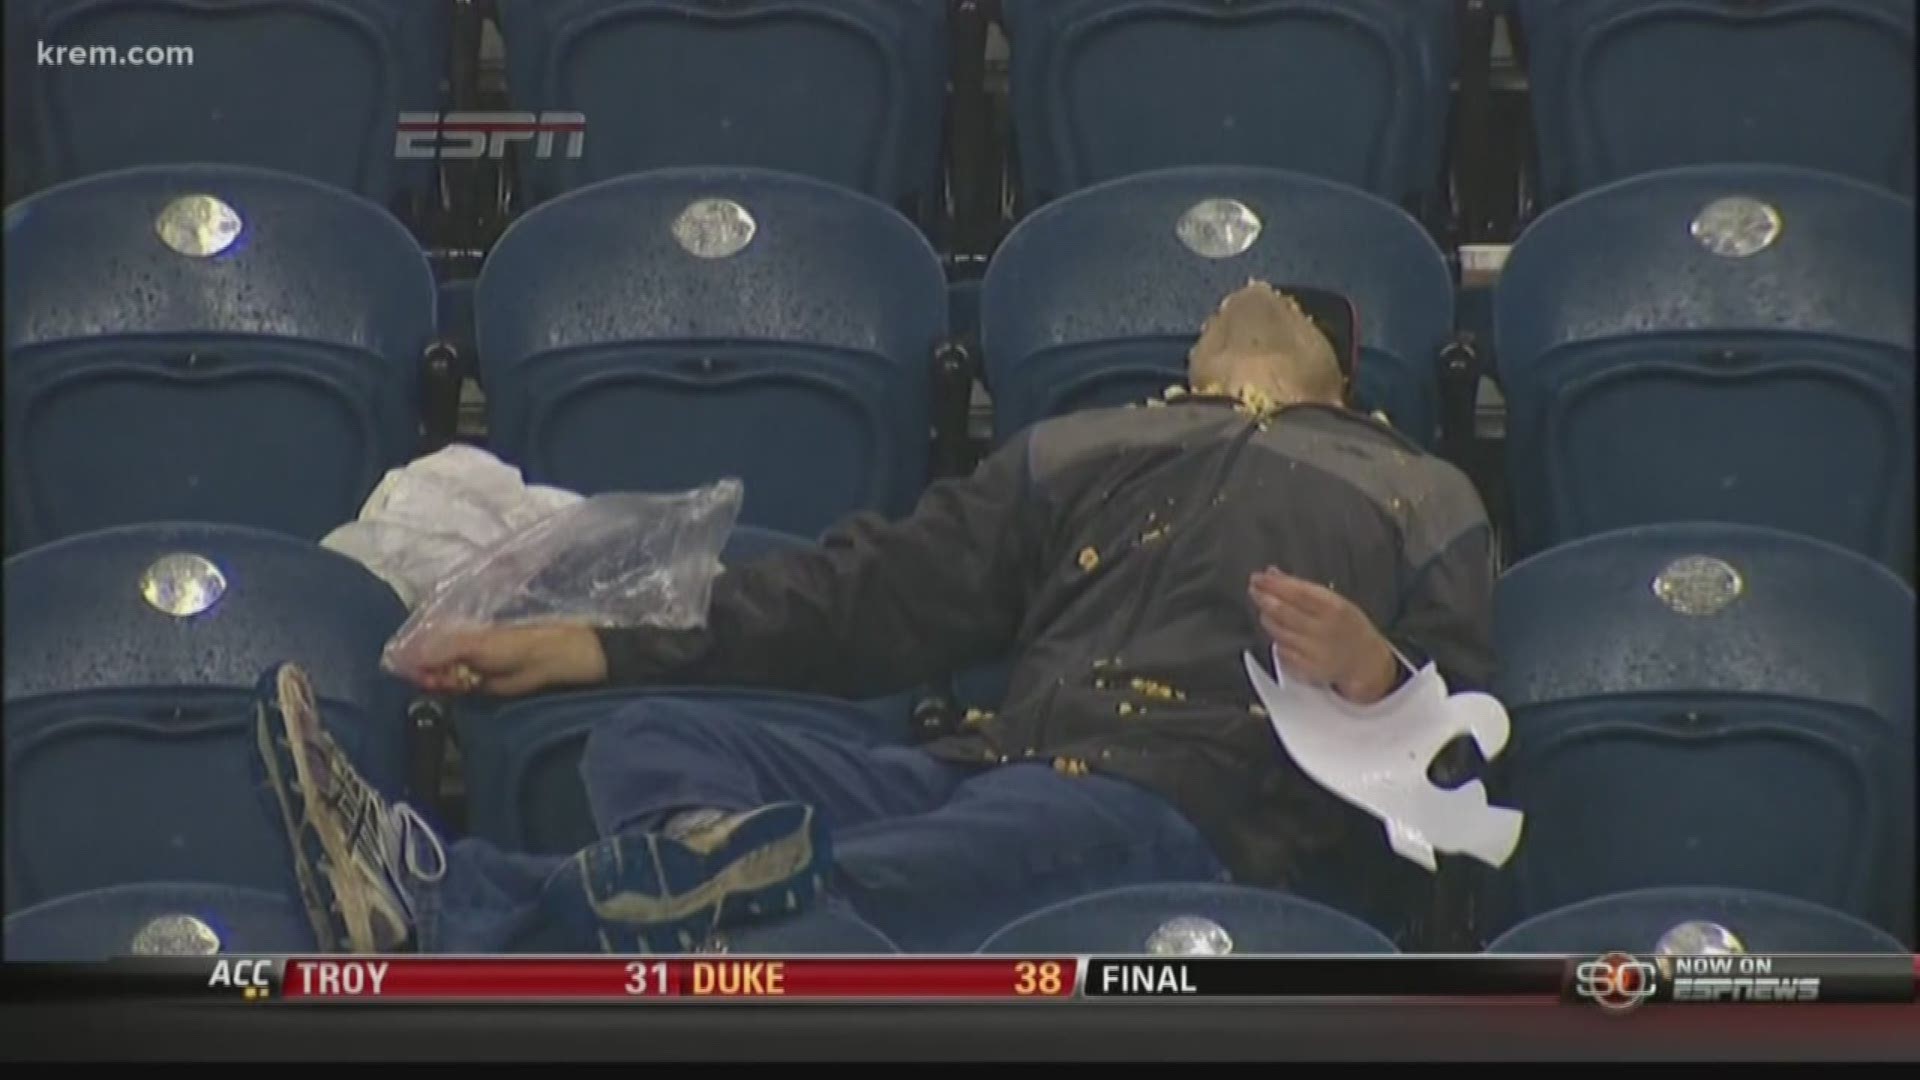 During a Washington State University football game against Stanford in 2013, ESPN cameras honed in on a Coug fan kicking back and chowing down on some popcorn. He was blissfully unaware of the camera's presence, much to the announcers' amusement.